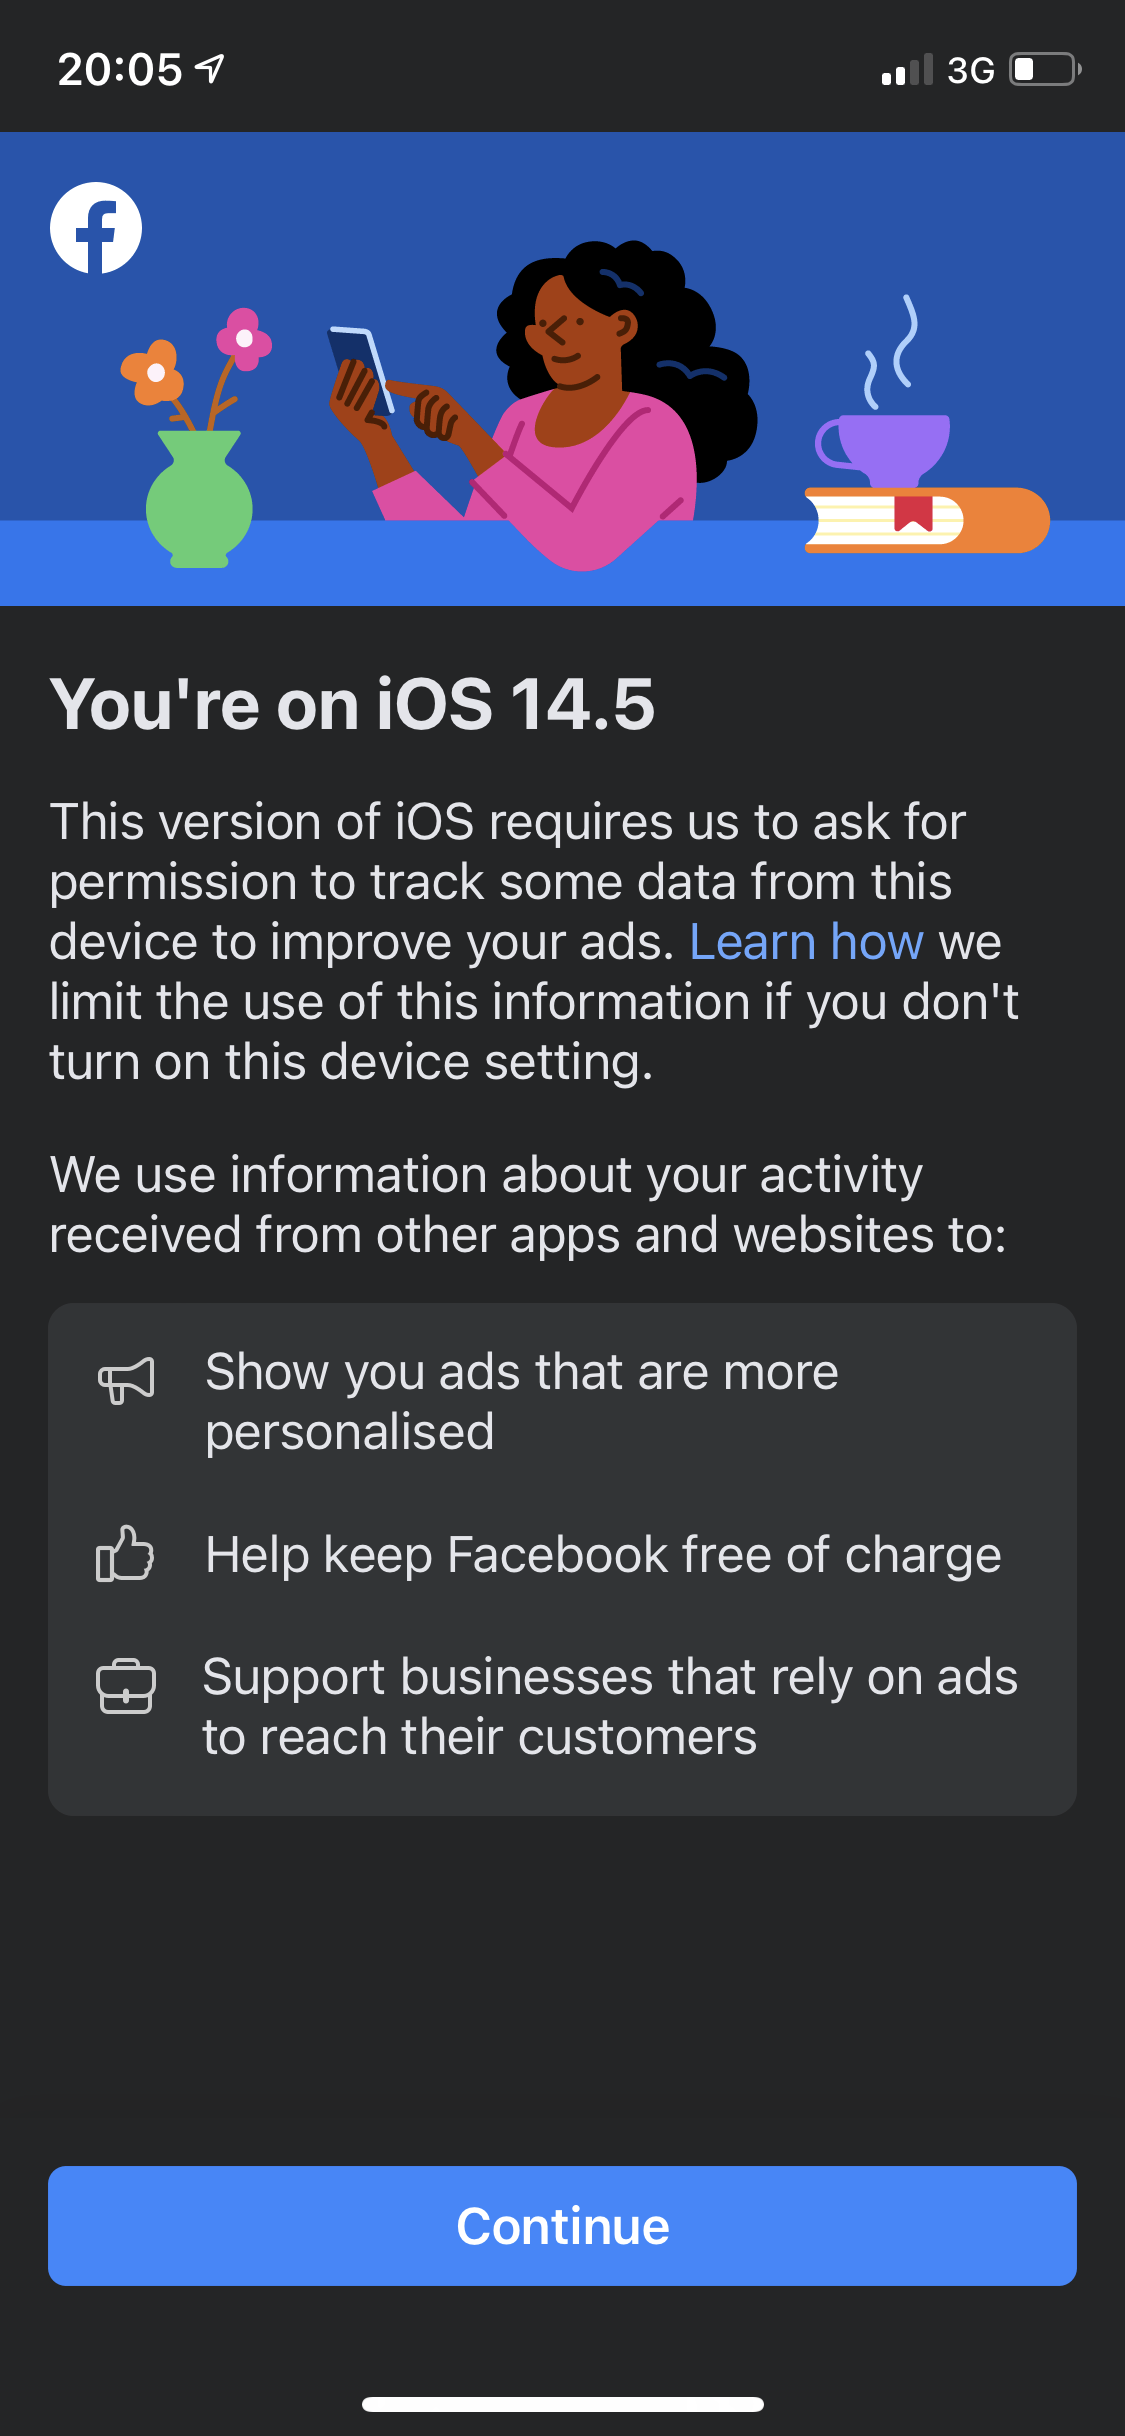 iOS 14.5, and what it means for businesses using digital marketing